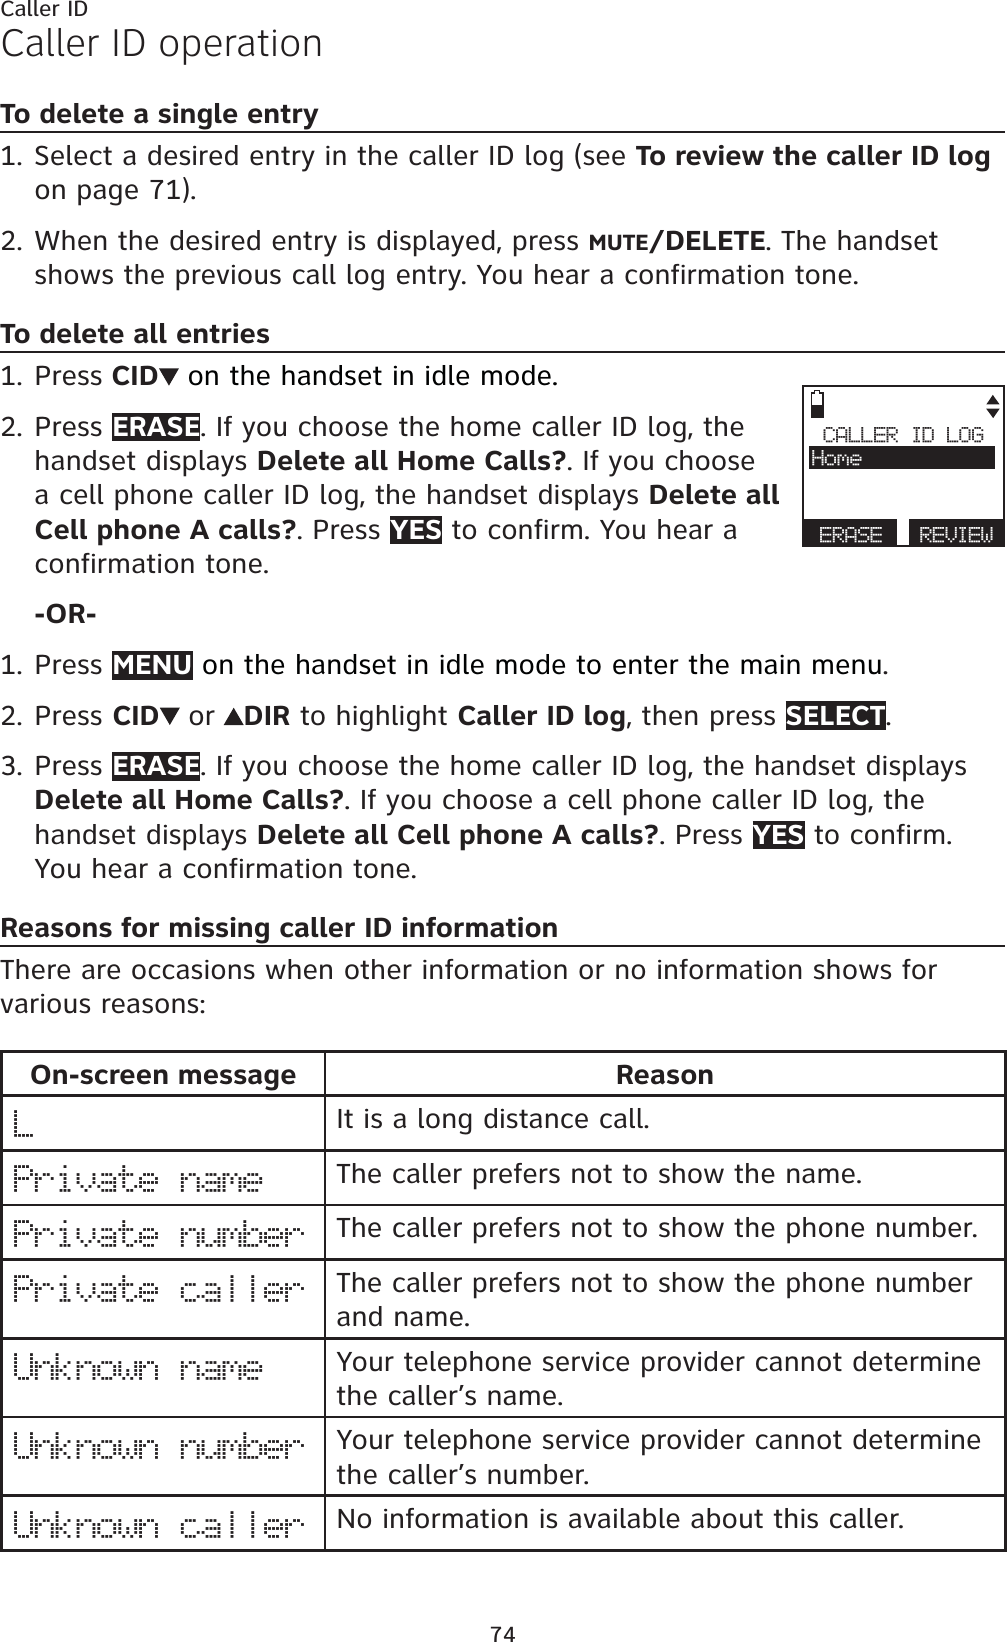 74Caller IDCaller ID operationTo delete a single entrySelect a desired entry in the caller ID log (see To review the caller ID logon page 71).When the desired entry is displayed, press MUTE/DELETE. The handset shows the previous call log entry. You hear a confirmation tone.To delete all entriesPress CID on the handset in idle mode.Press ERASE. If you choose the home caller ID log, the handset displays Delete all Home Calls?. If you choose a cell phone caller ID log, the handset displays Delete all Cell phone A calls?. Press YES to confirm. You hear a confirmation tone.-OR-Press MENU on the handset in idle mode to enter the main menu.Press CID or DIR to highlight Caller ID log, then press SELECT.Press ERASE. If you choose the home caller ID log, the handset displays Delete all Home Calls?. If you choose a cell phone caller ID log, the handset displays Delete all Cell phone A calls?. Press YES to confirm. You hear a confirmation tone.Reasons for missing caller ID informationThere are occasions when other information or no information shows for various reasons:On-screen message ReasonLIt is a long distance call.Private name The caller prefers not to show the name.Private number The caller prefers not to show the phone number.Private caller The caller prefers not to show the phone number and name. Unknown name Your telephone service provider cannot determine the caller’s name.Unknown number Your telephone service provider cannot determine the caller’s number.Unknown caller No information is available about this caller.1.2.1.2.1.2.3.CALLER ID LOGHomeERASE REVIEW